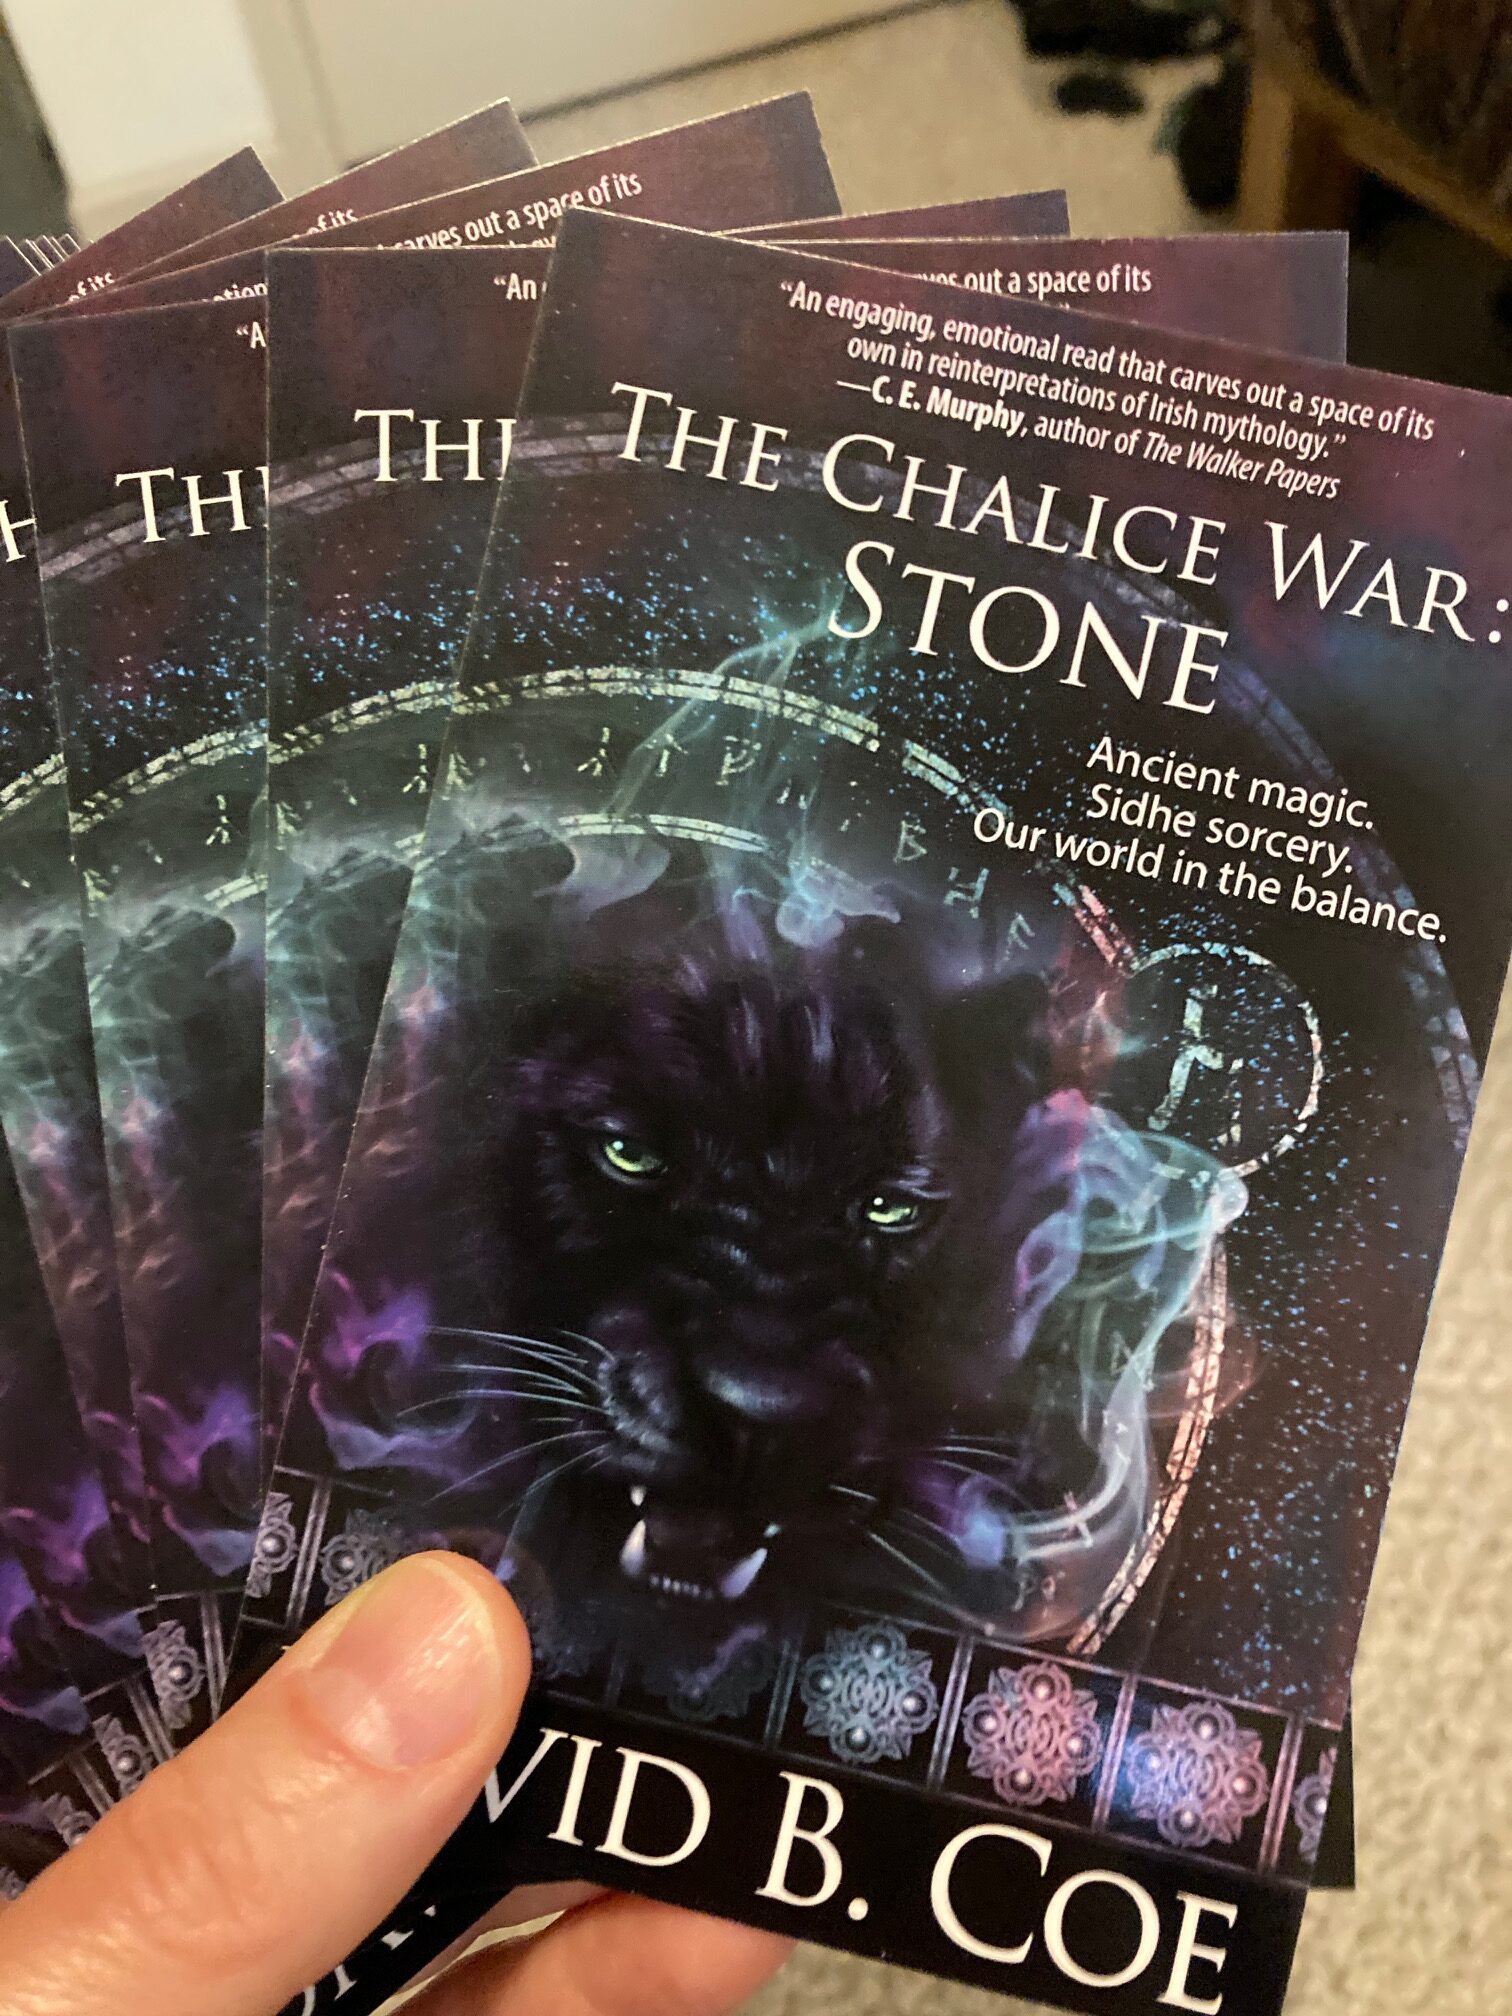 The Chalice War: Stone postcards